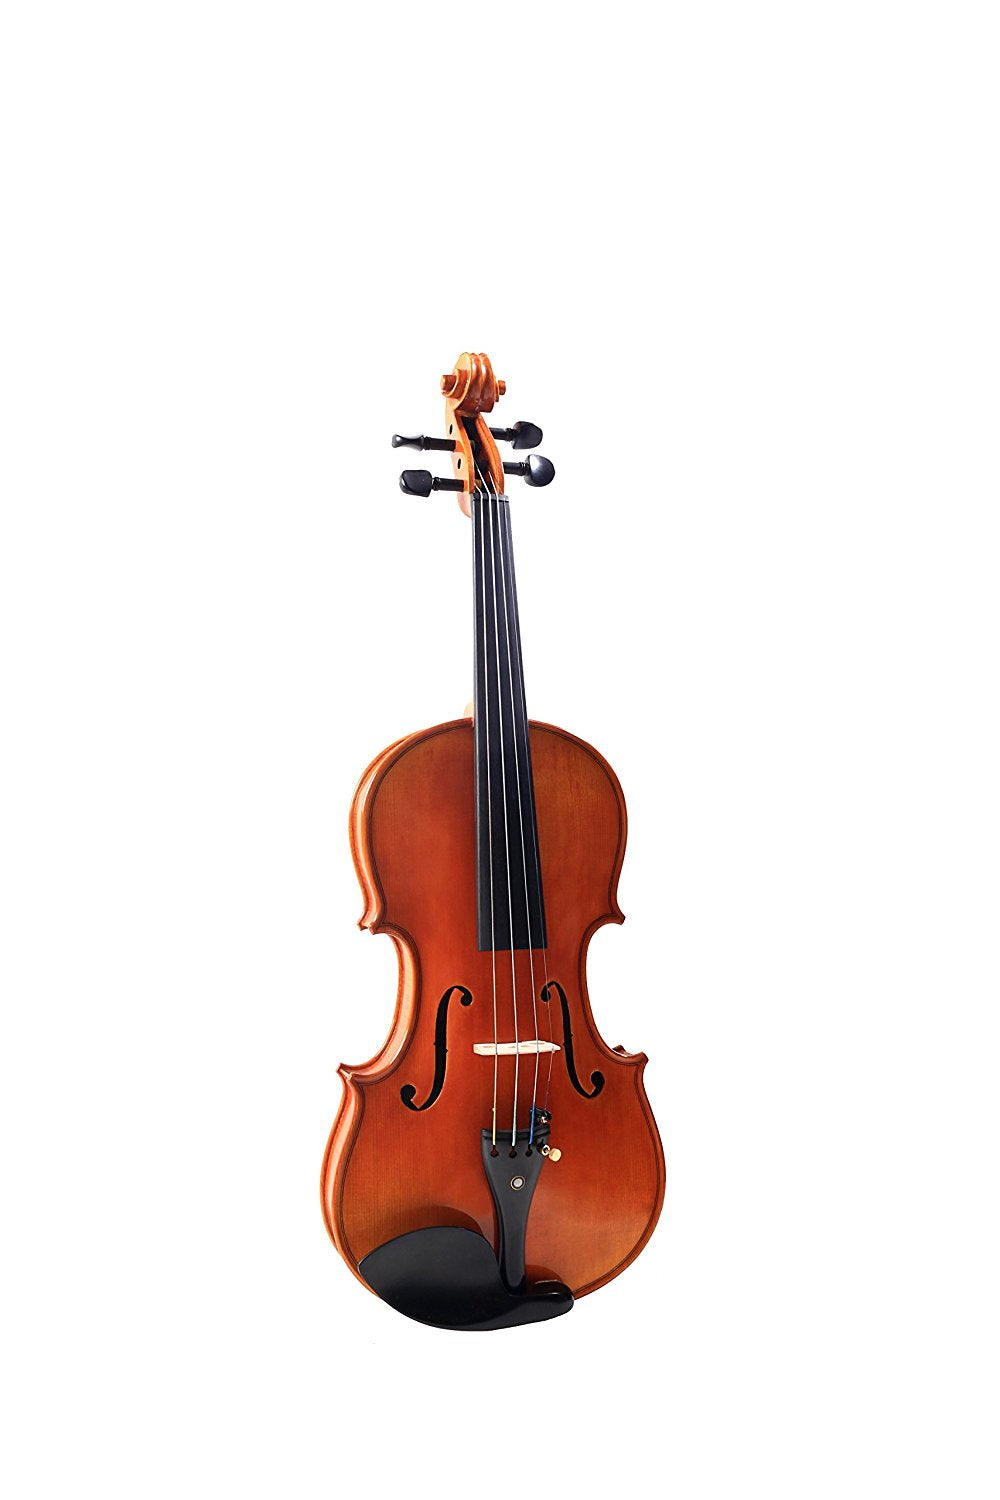 SANDNER DYNASTY VIOLIN - OUTFIT 300 - Harry Green Music World